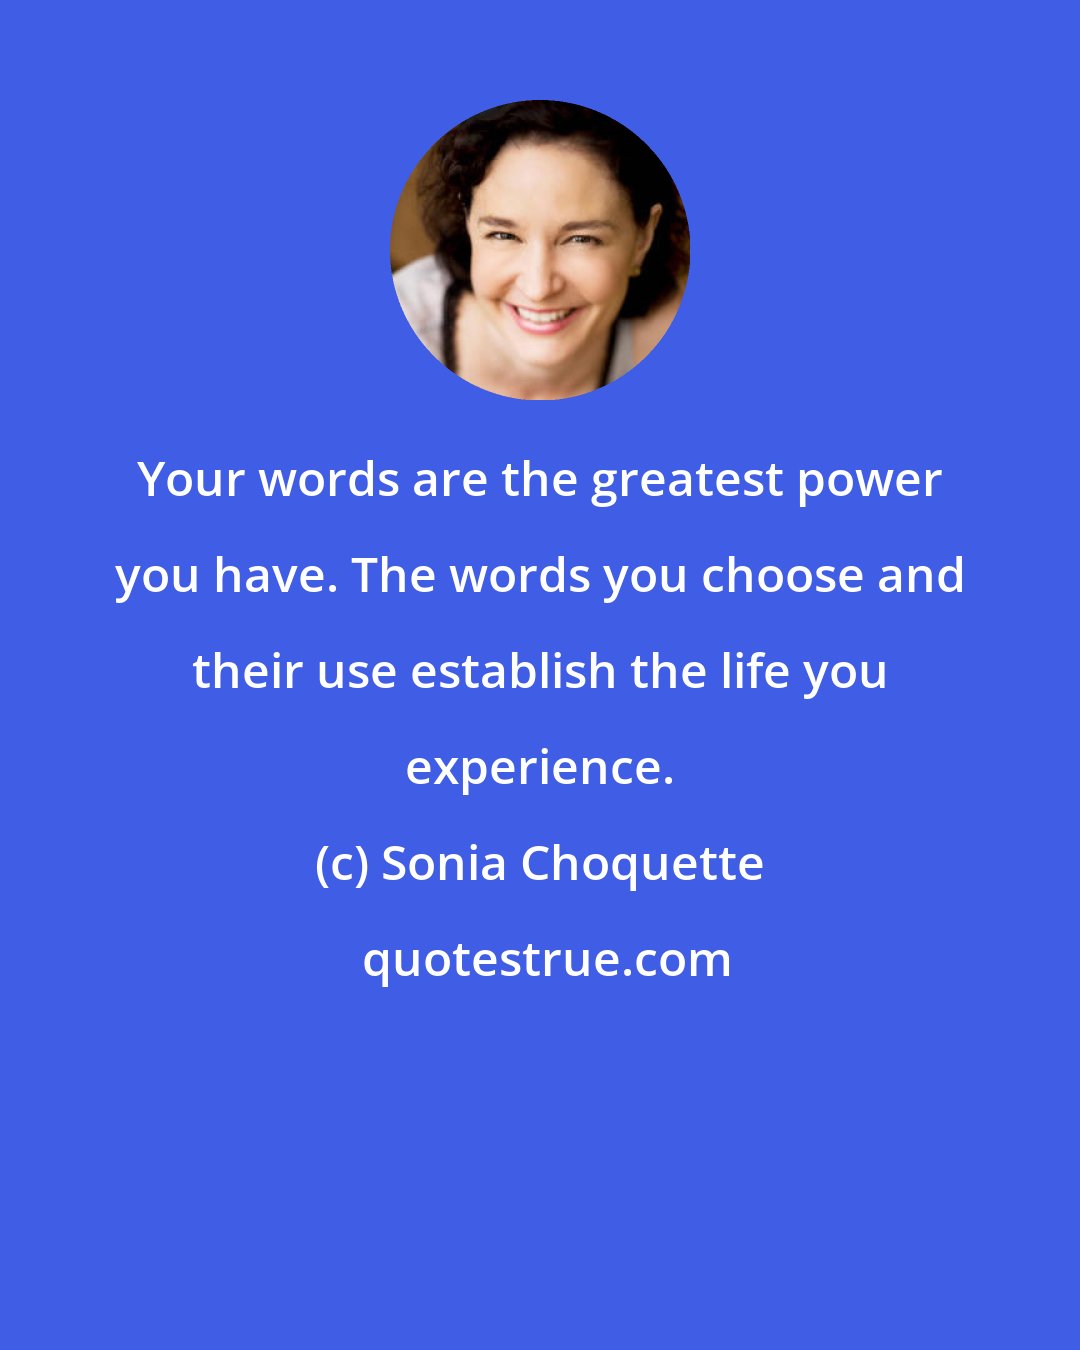 Sonia Choquette: Your words are the greatest power you have. The words you choose and their use establish the life you experience.